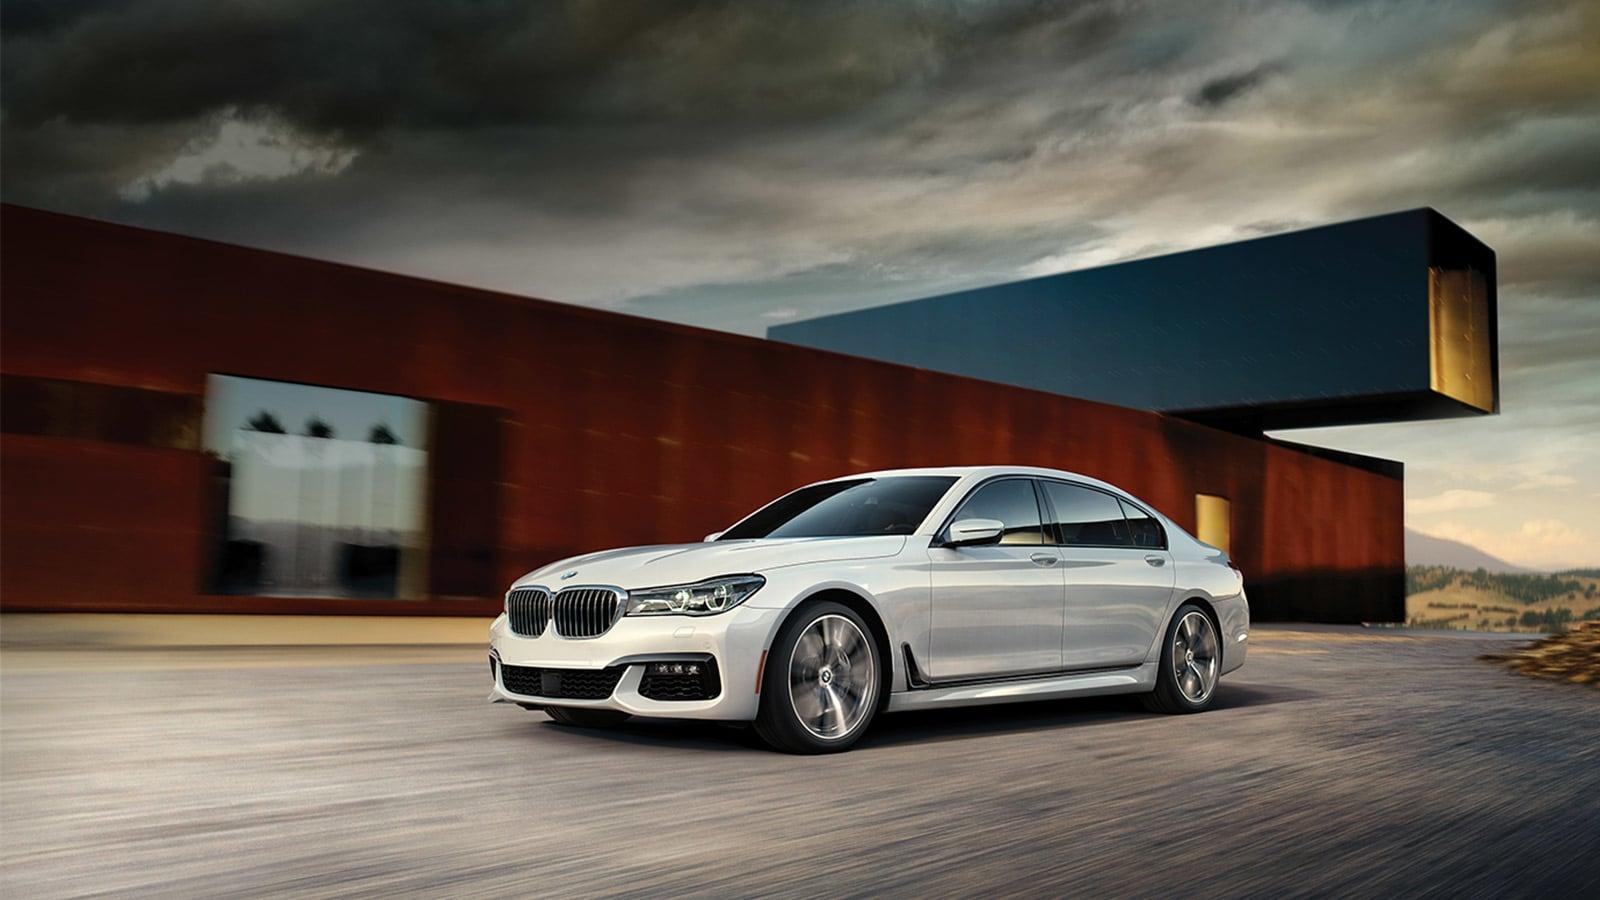 BMW 7 Series, Release Date, Features, Pricing, Engine